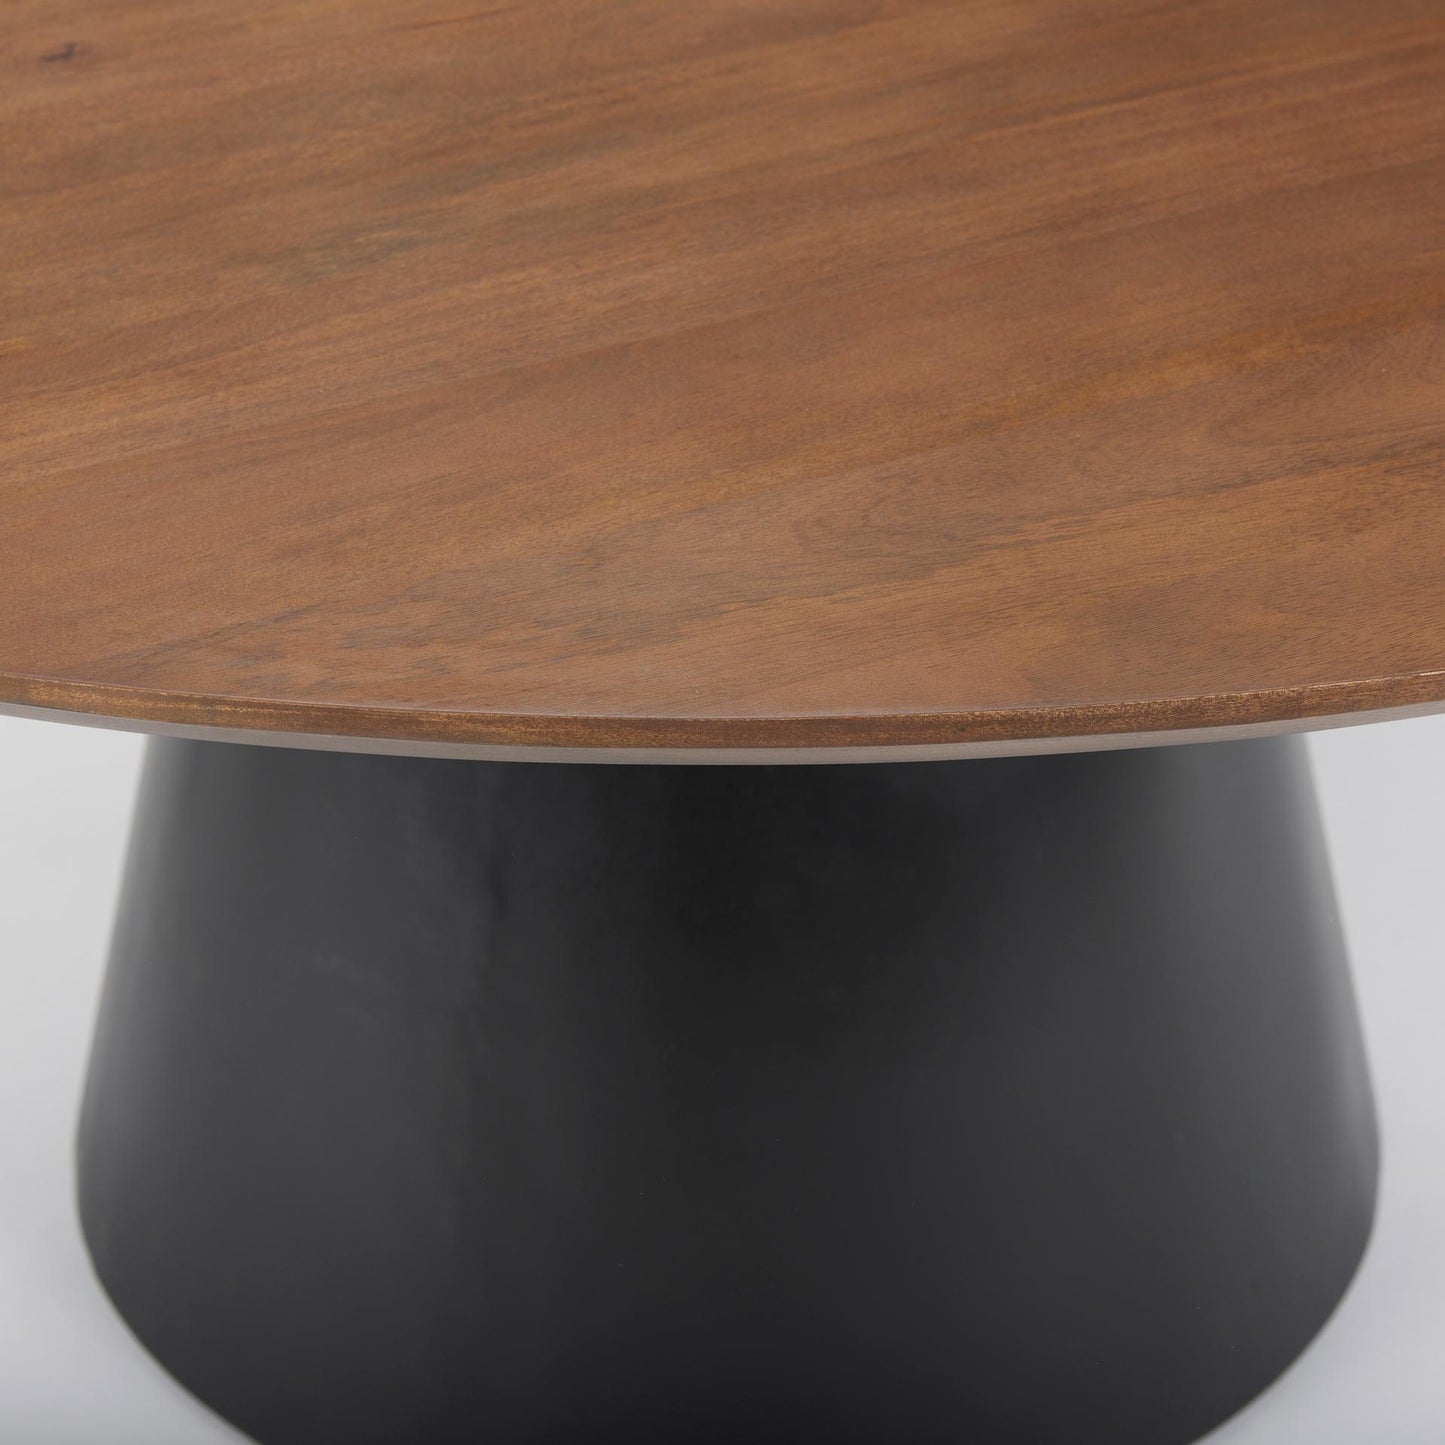 Mitchell Black Metal Pedestal Base with Brown Wood Top Dining Table 63.0L x 63.0W x 30.0H